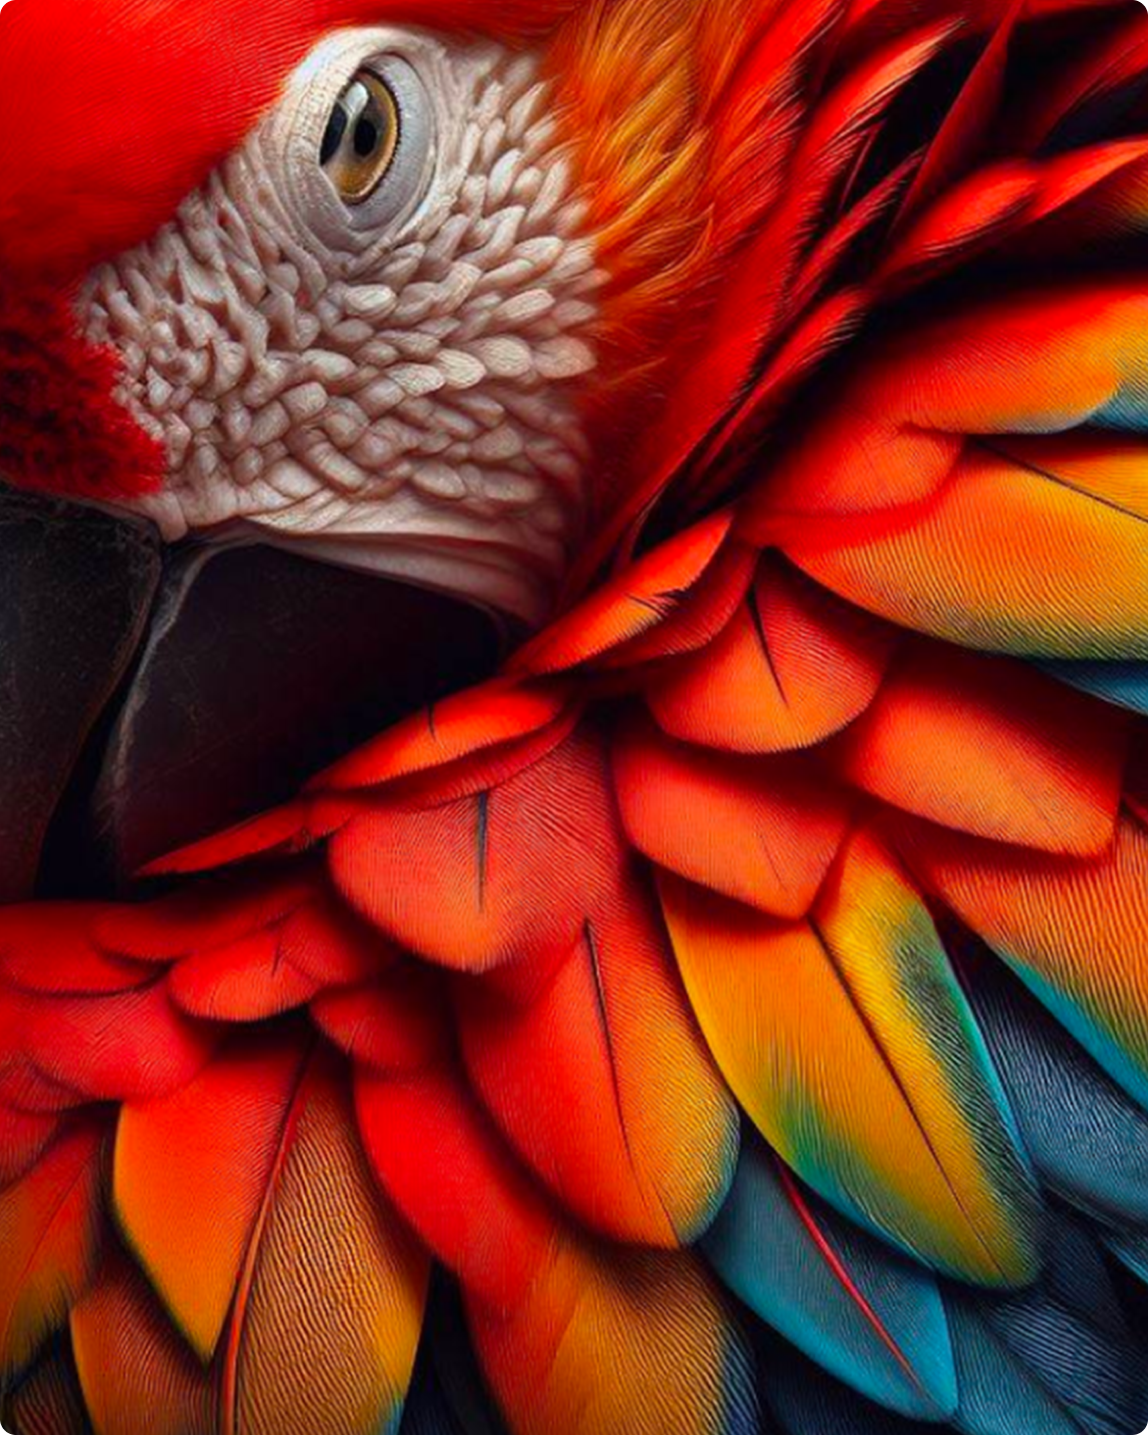 A close up of a colorful parrot.